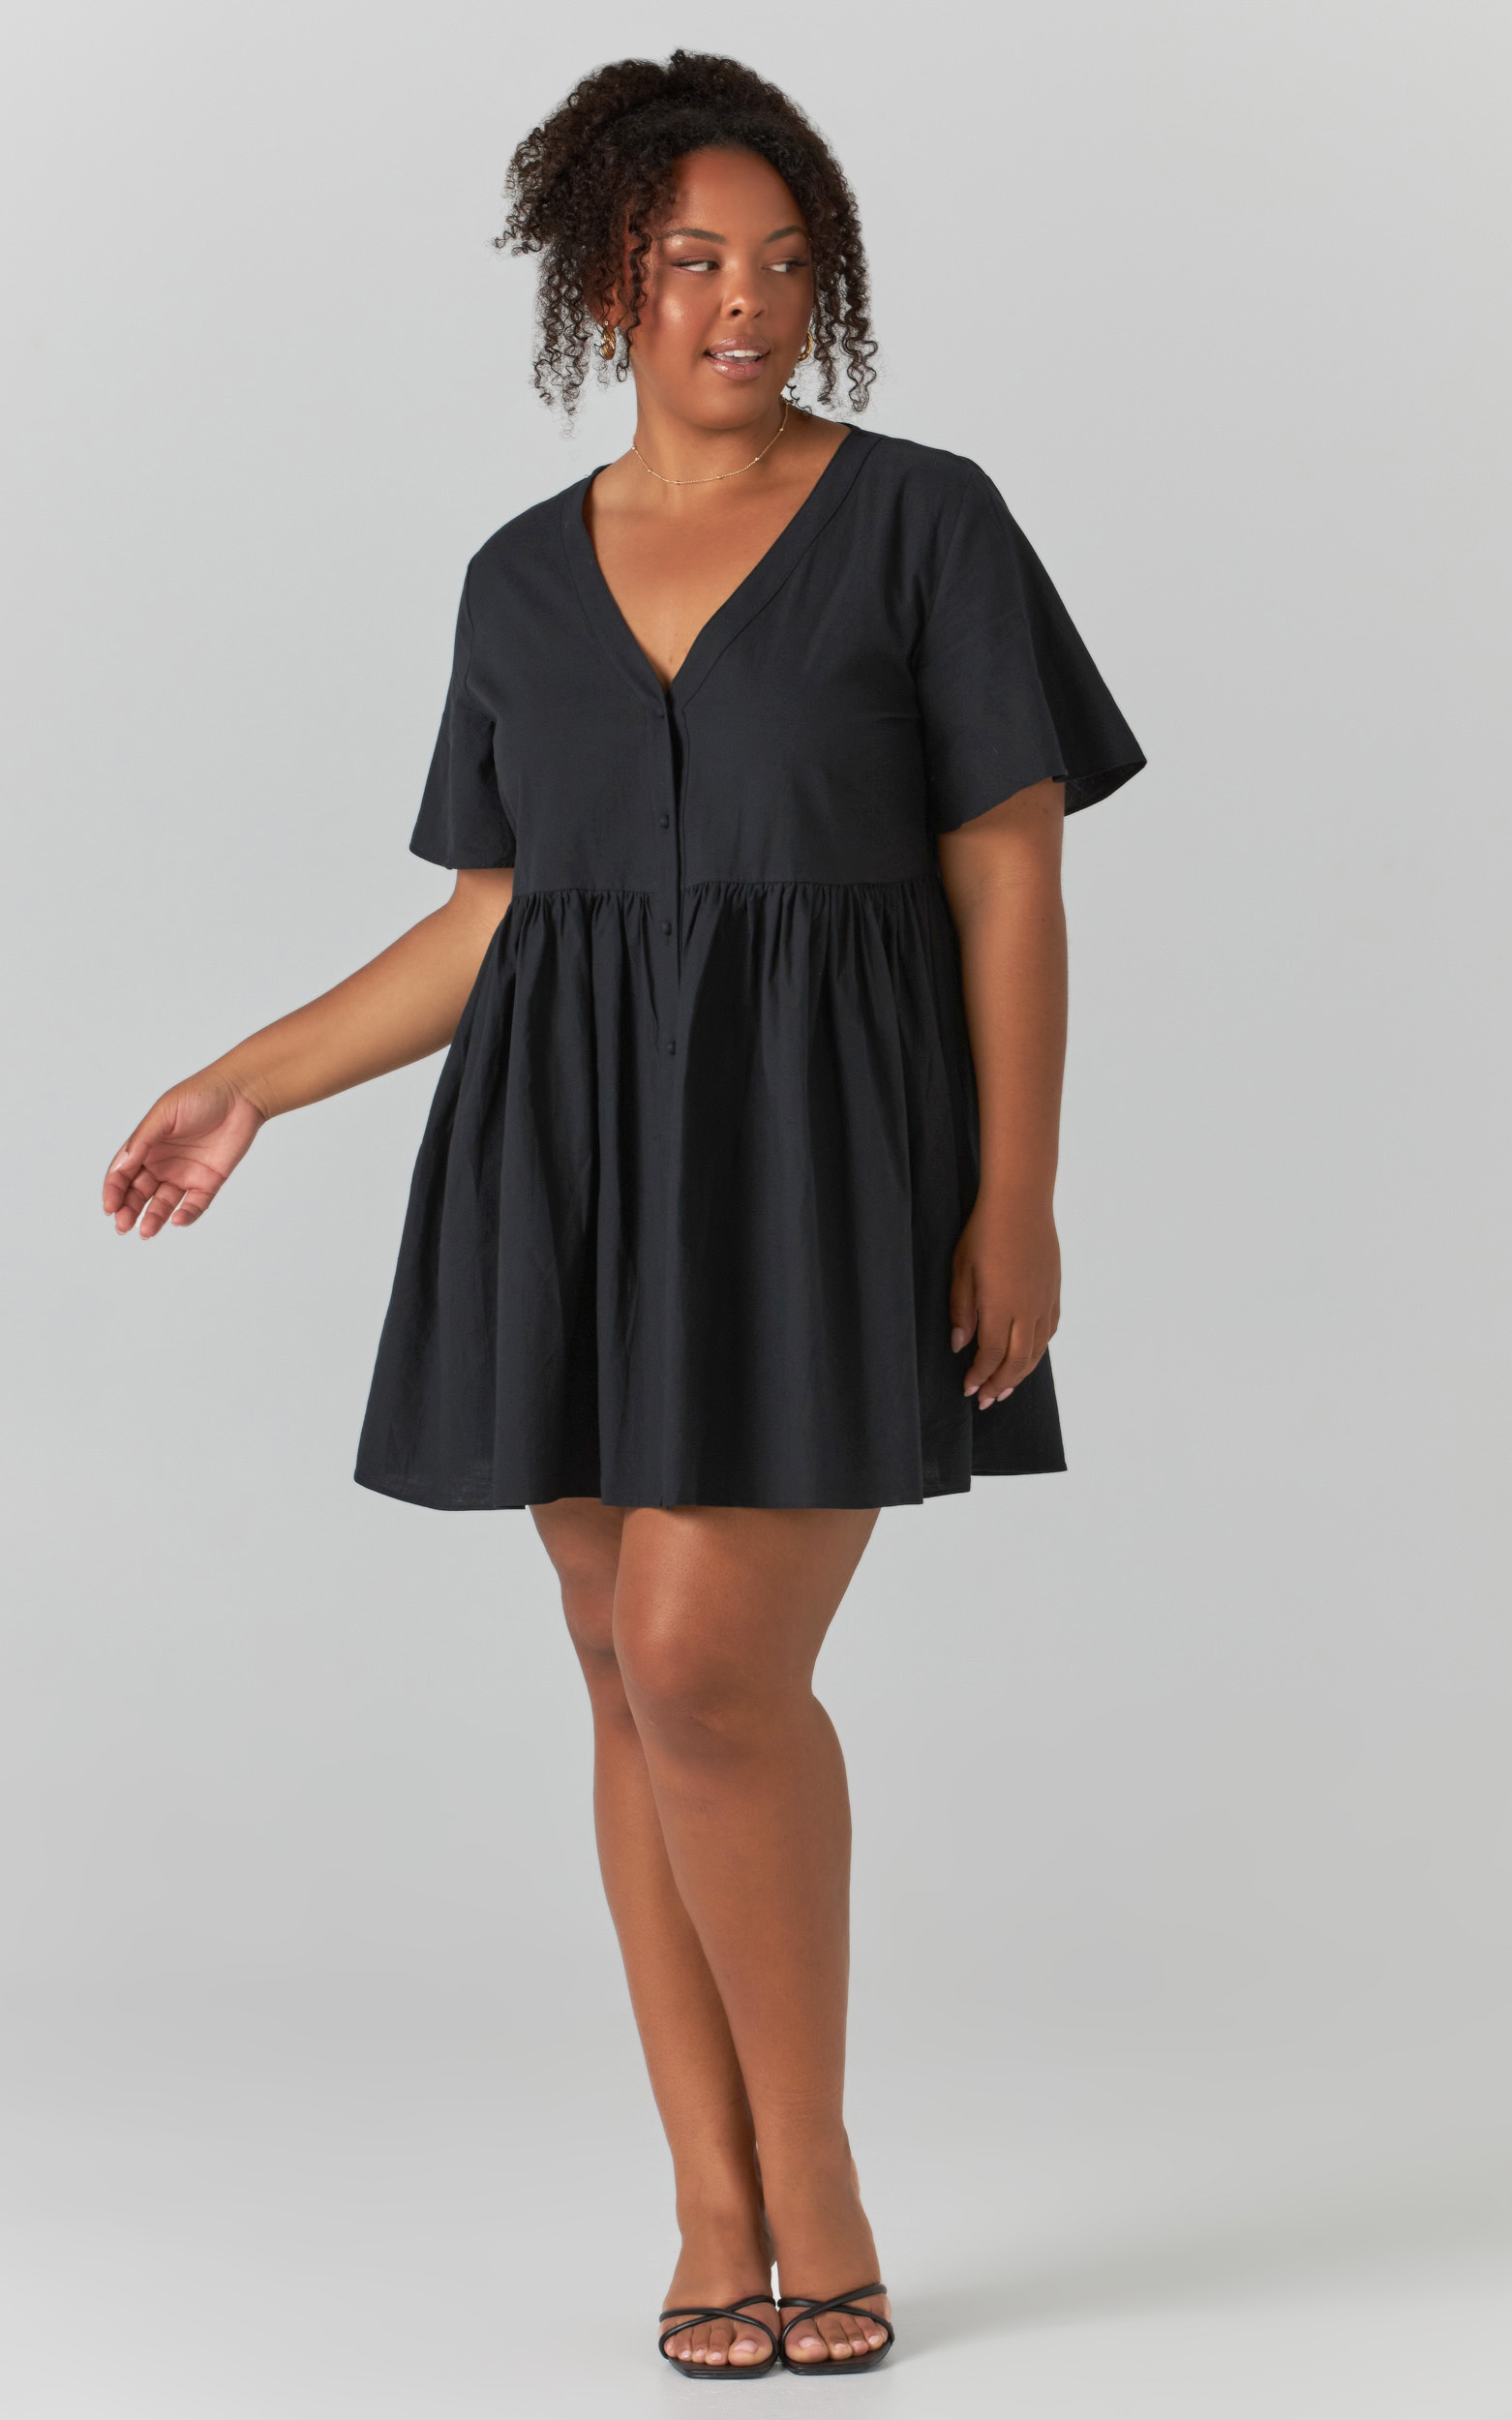 Staycation Smock Button Up Mini Dress in Black - 20, BLK1, hi-res image number null